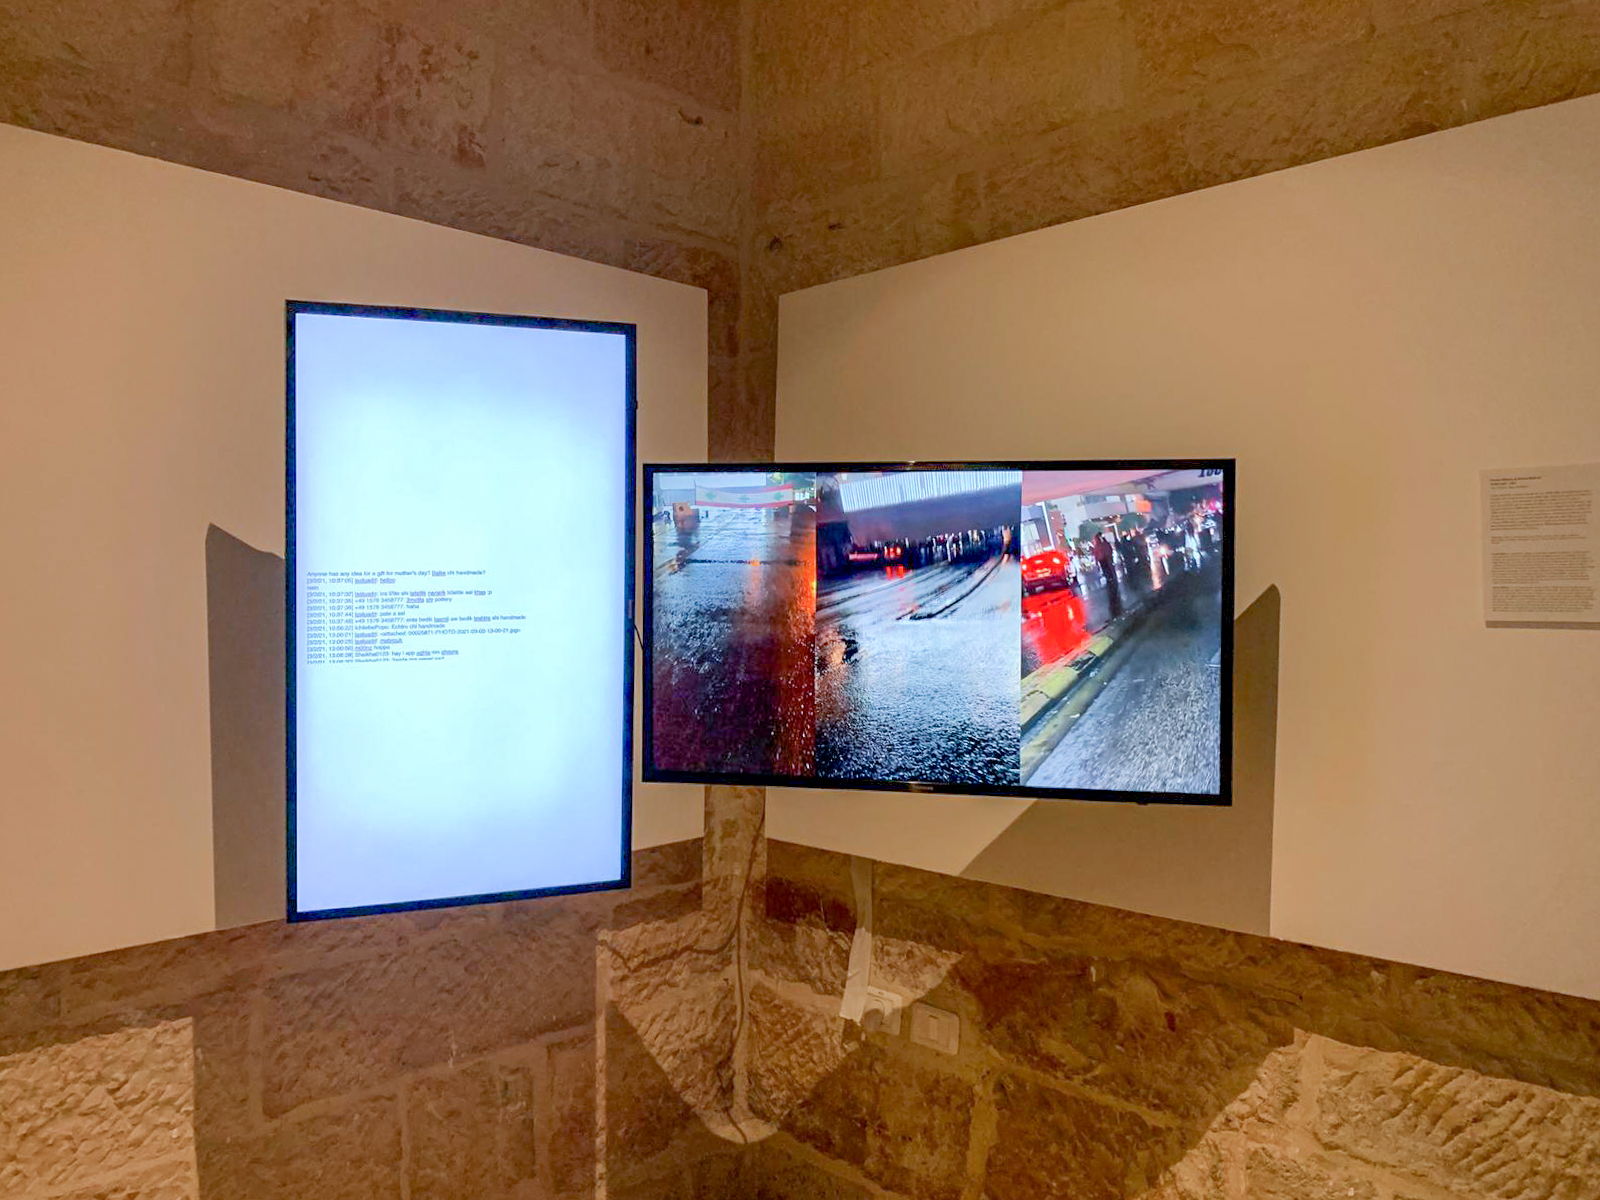 Charbel AlKhoury and Monica Basbous, “POPG Clanc,” 2021. Two-channel video installation. Photo: Reem Masri.